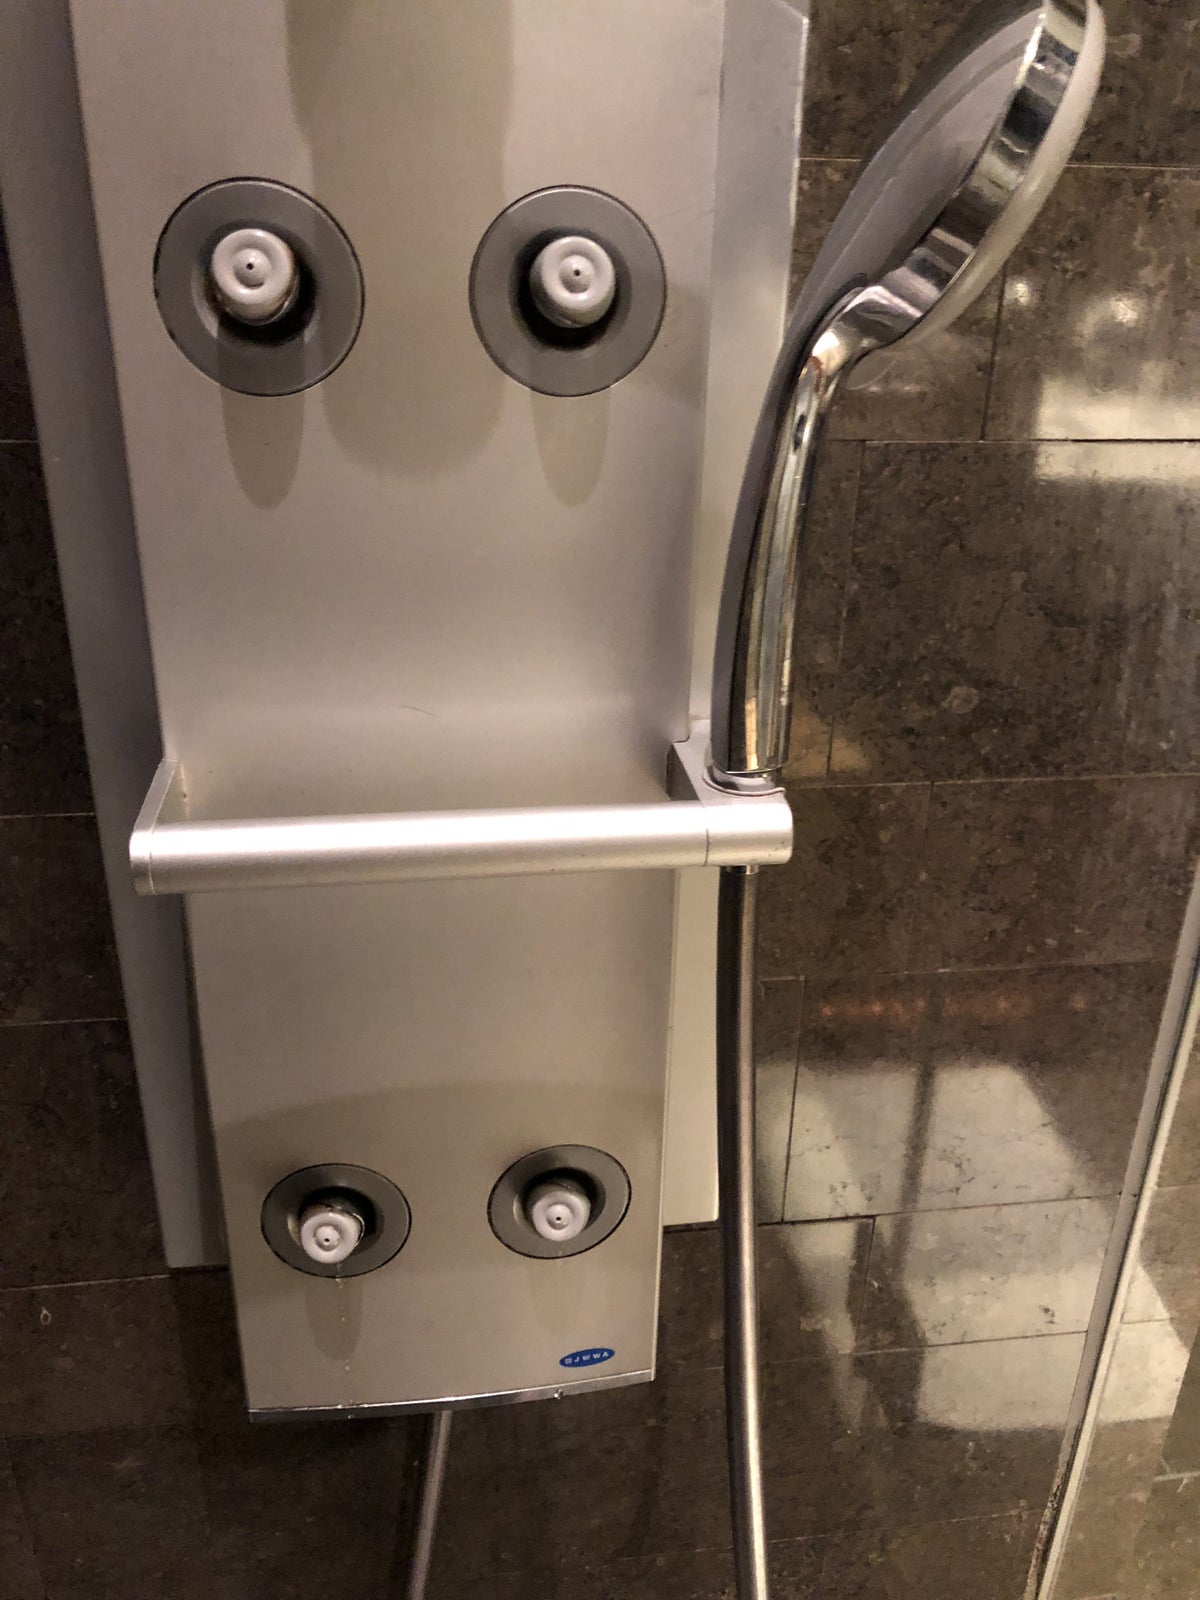 Japan Airlines First Class Lounge Shower Body Nozzles